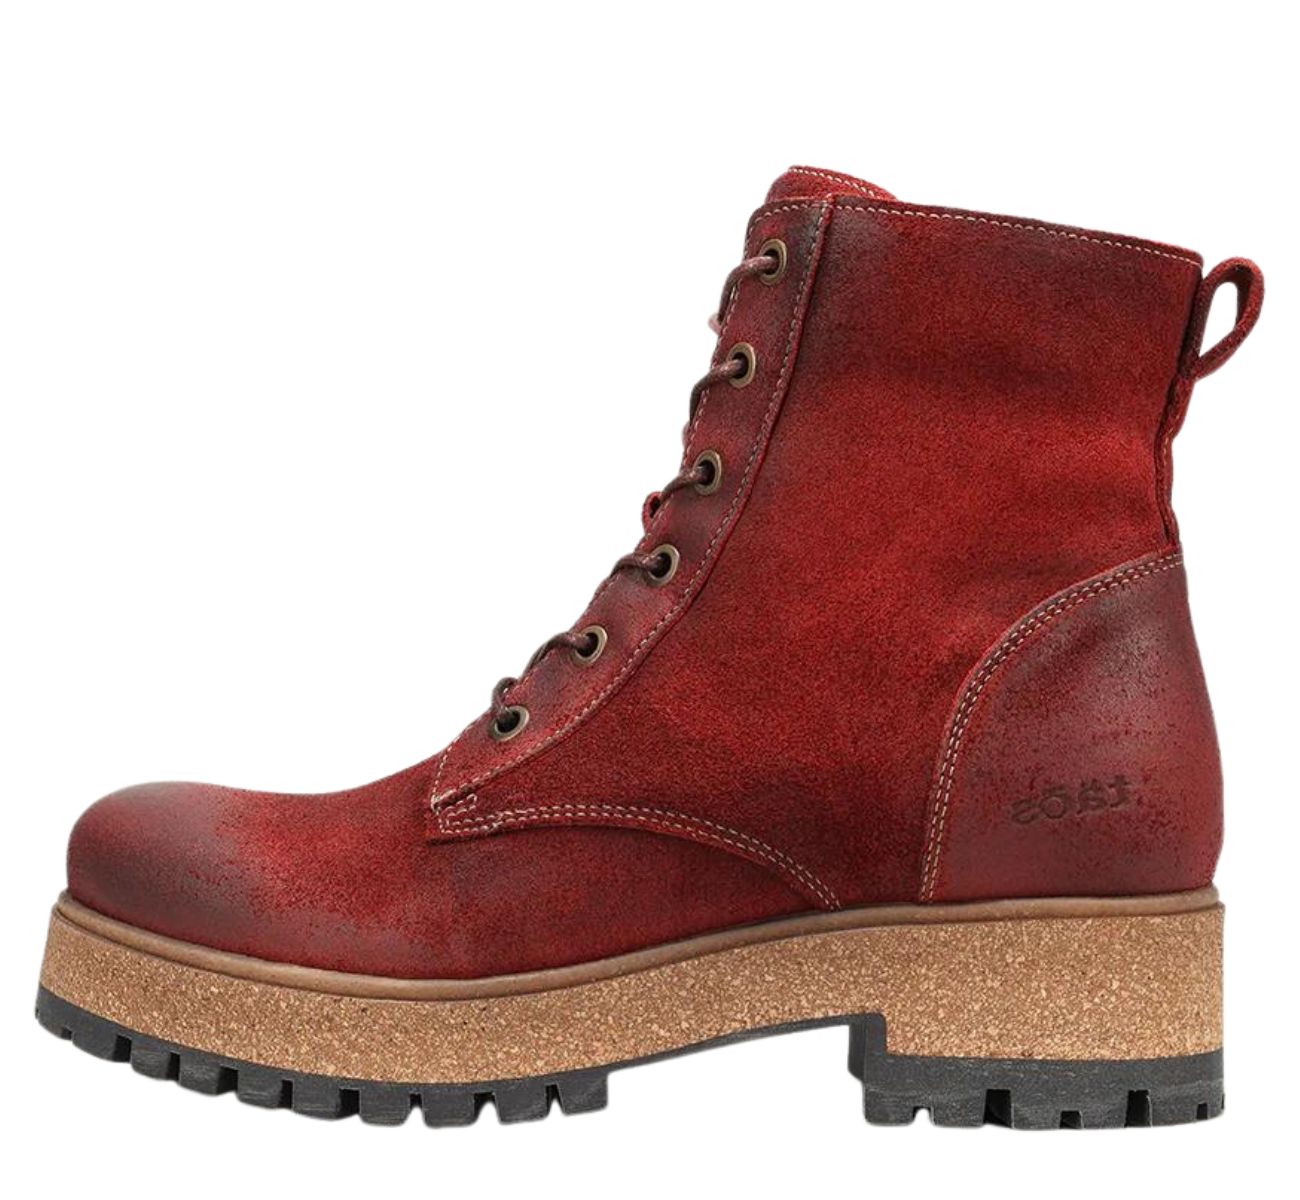 Women's Buckled Heeled Combat Boots (Maroon) | 1:6 Scale Women's Clothes &  Accessories | GISA-010A